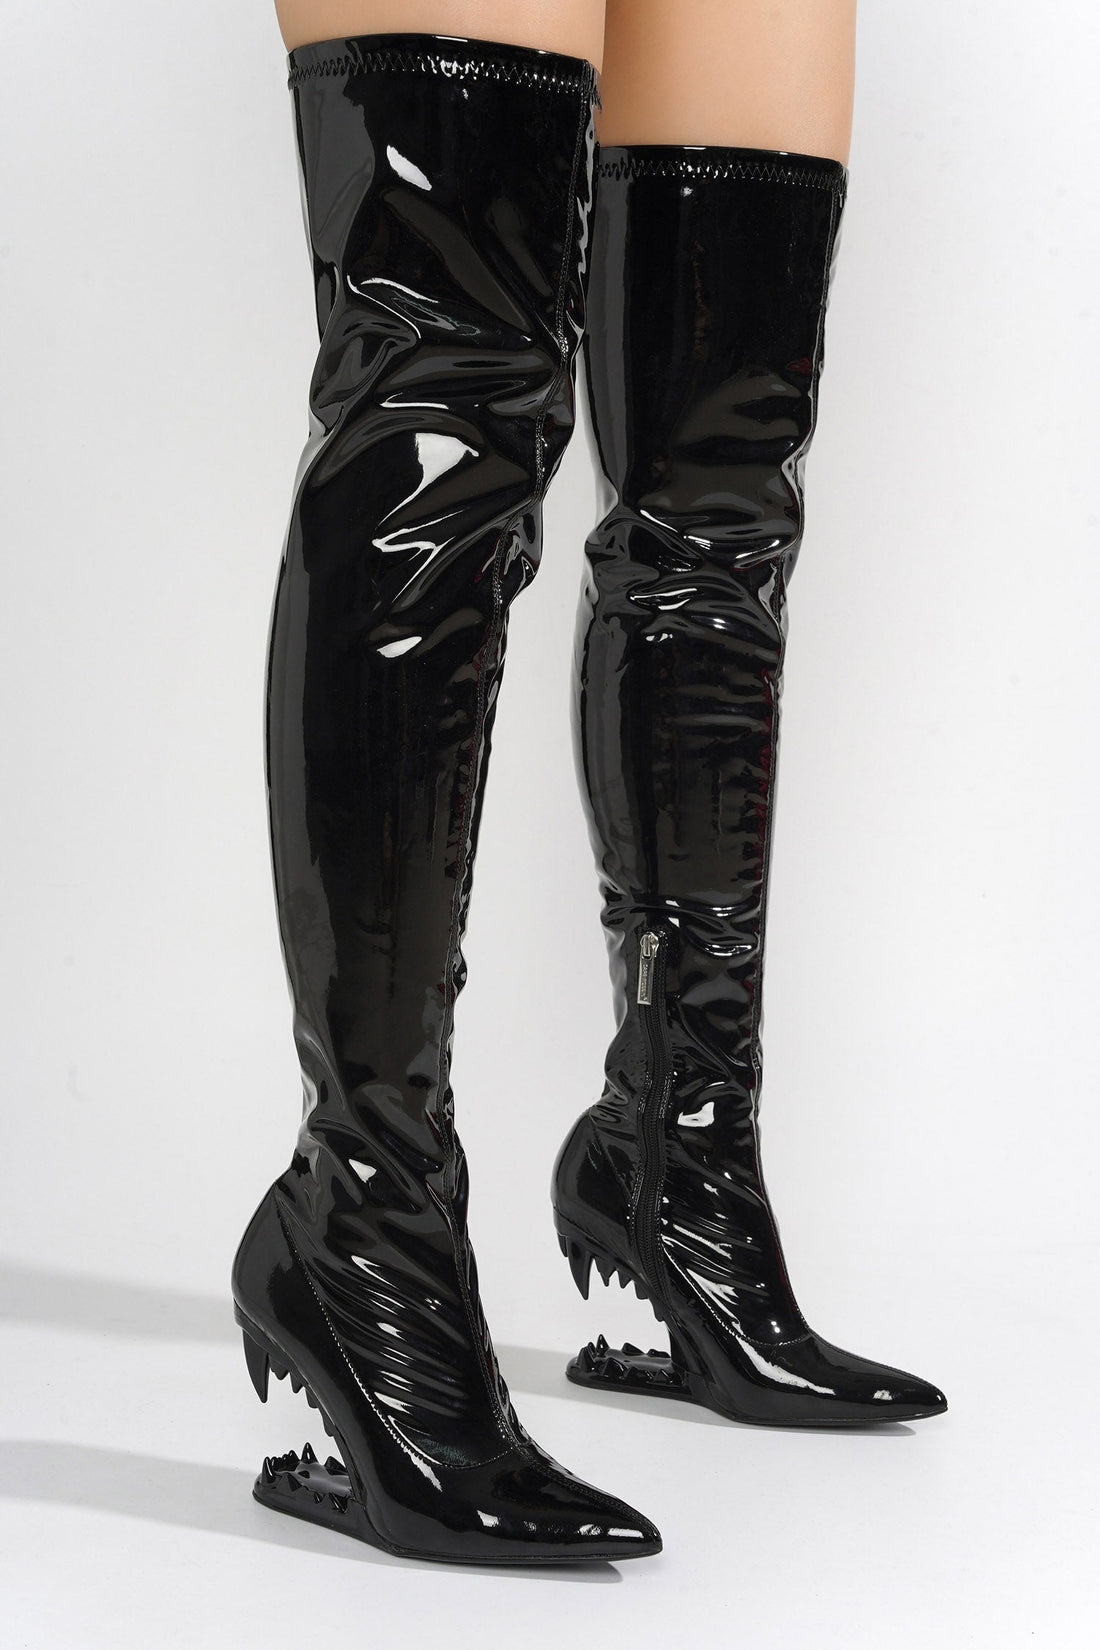 Unruly Patent Leather Over The Knee Boots